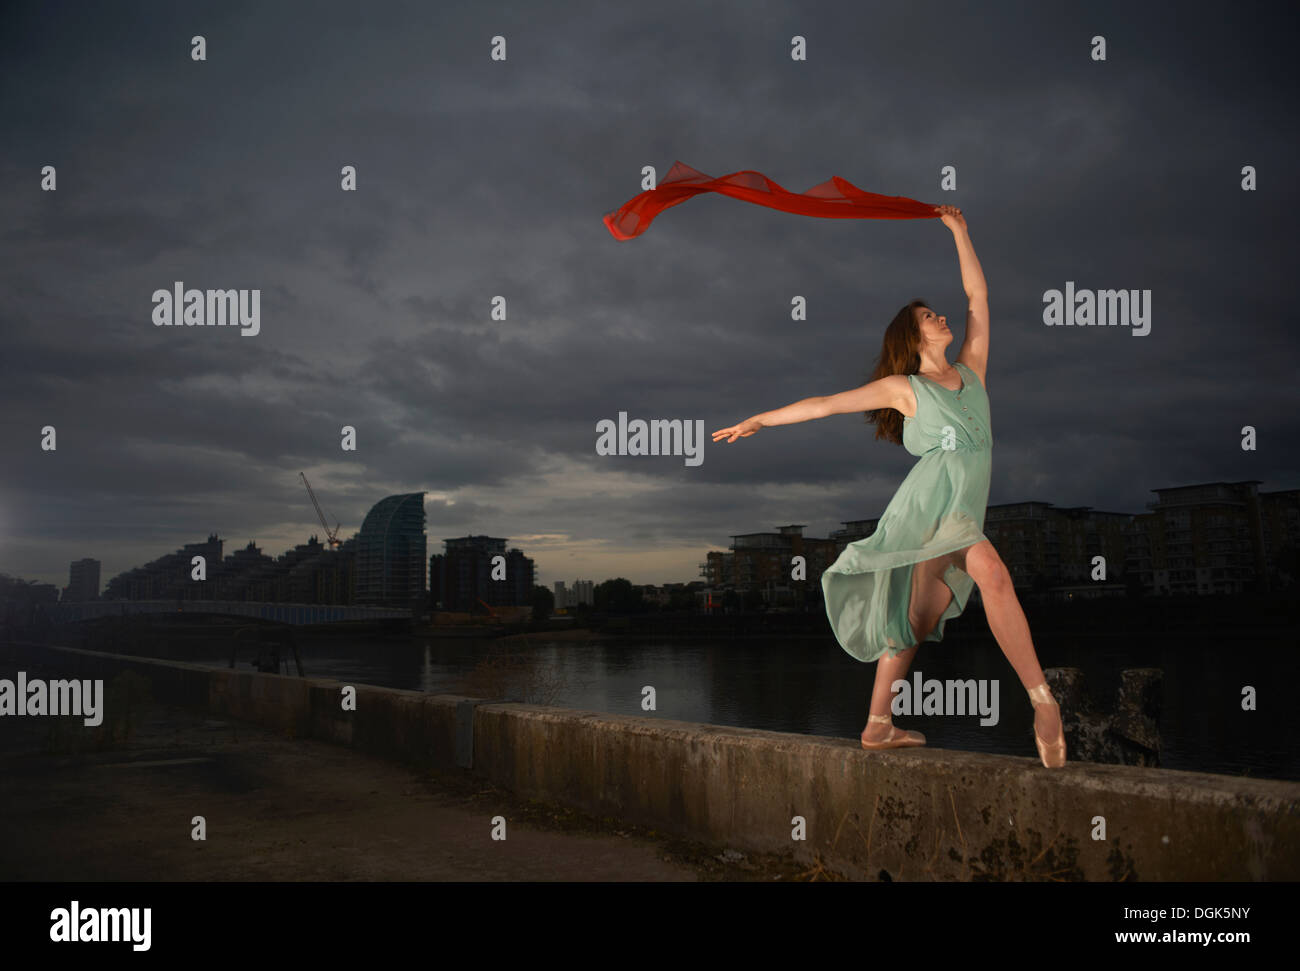 Ballet dancer holding red scarf on wall Stock Photo